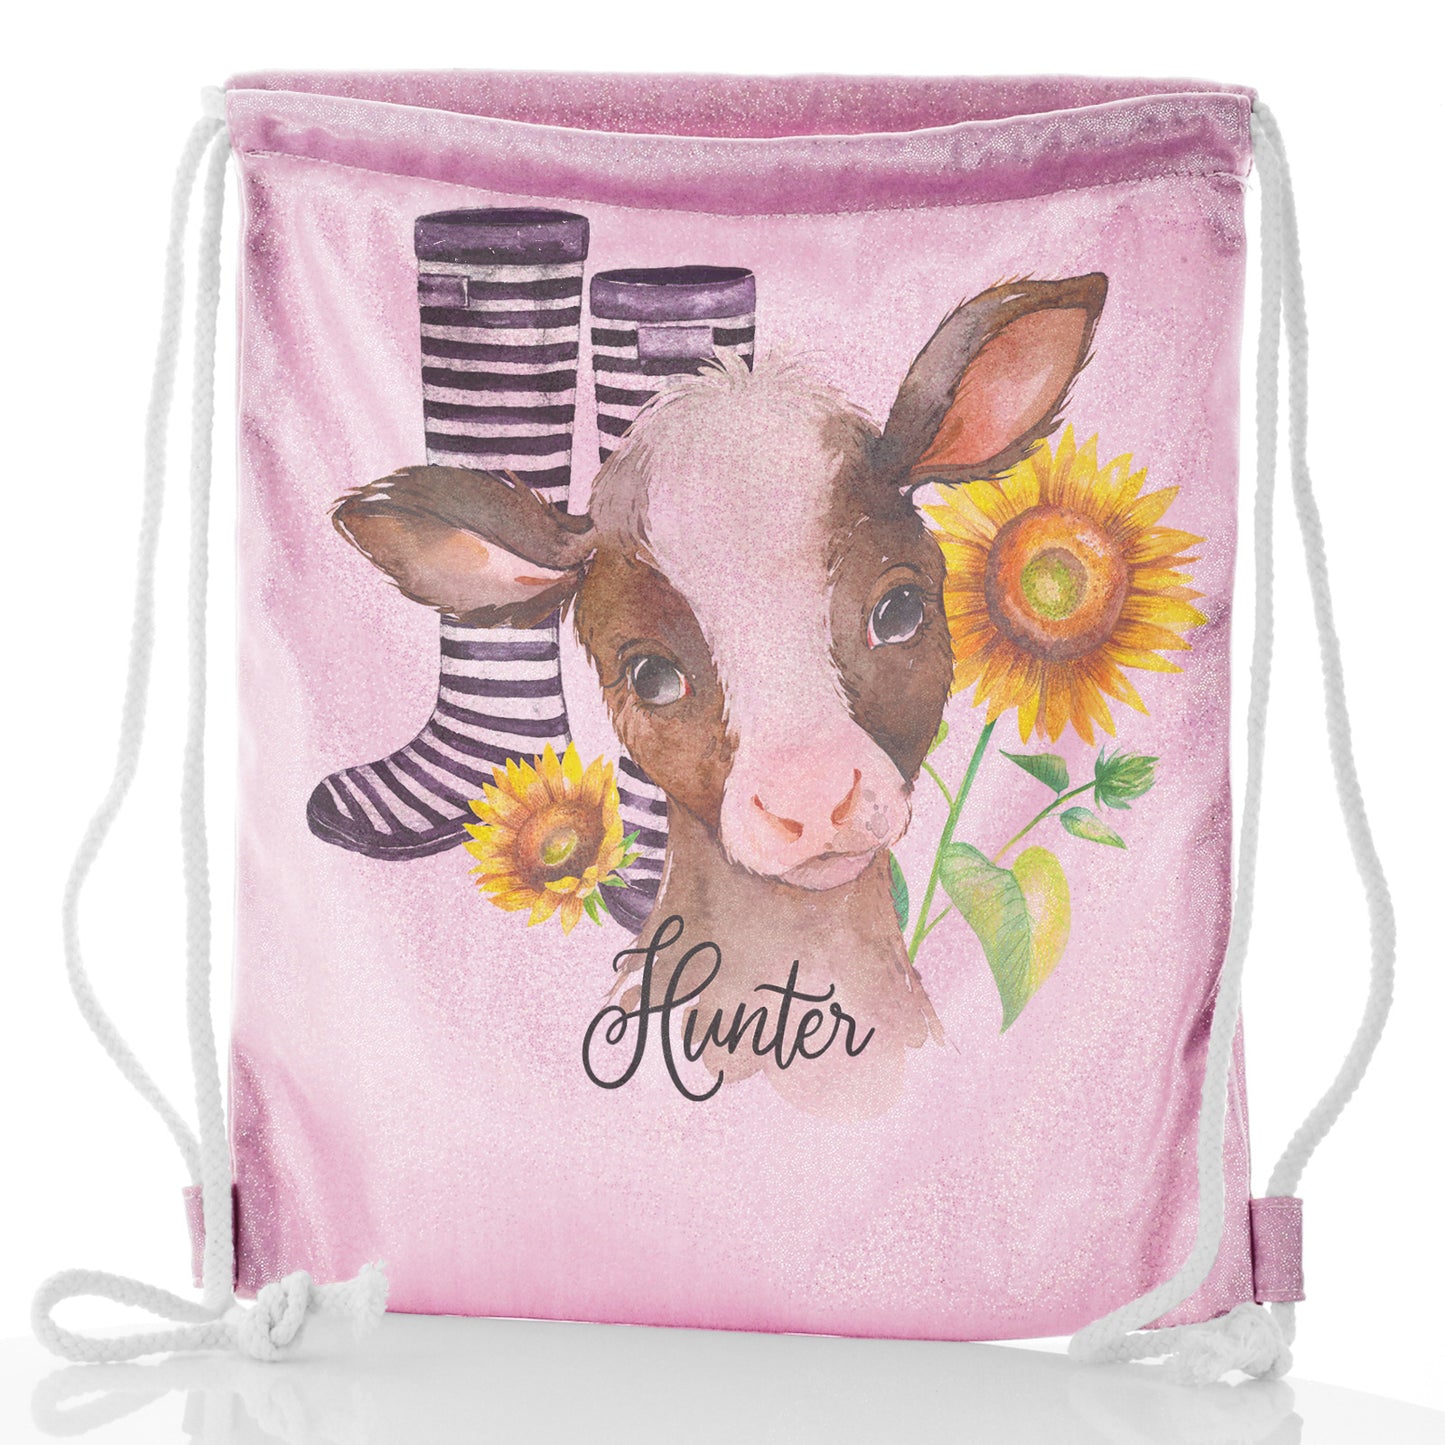 Personalised Glitter Drawstring Backpack with Brown Cow Yellow Sunflowers and Cute Text